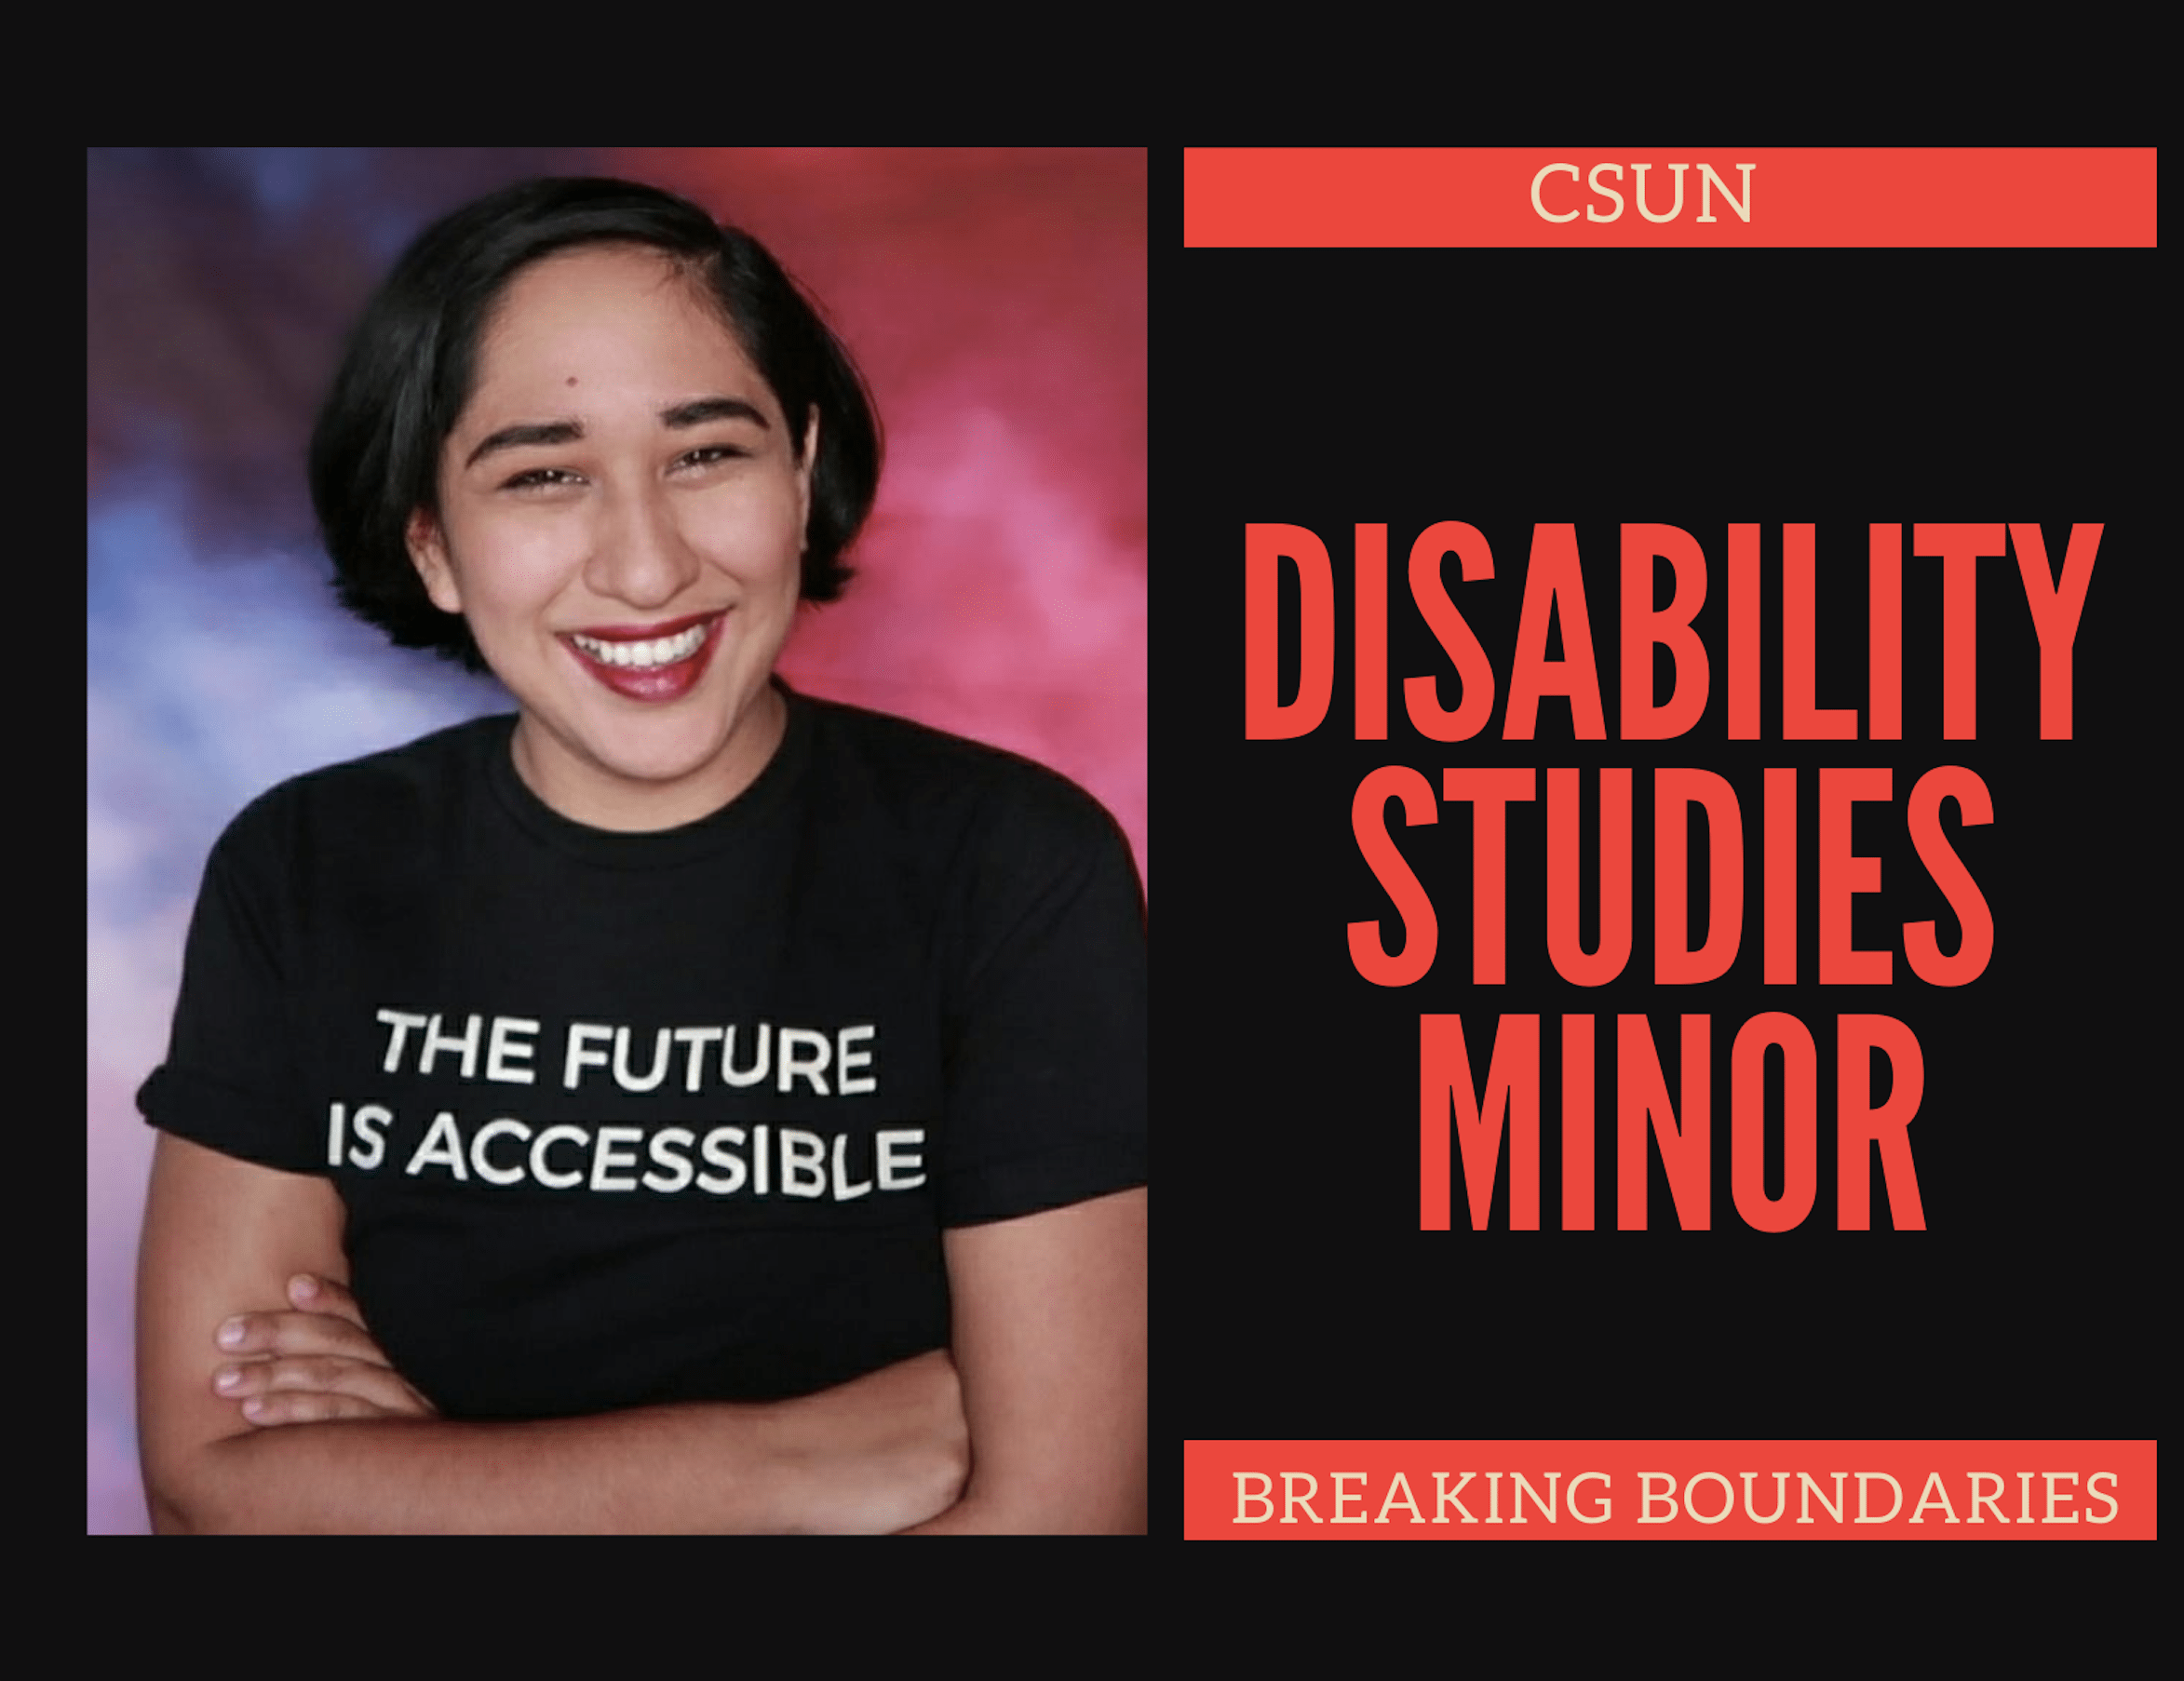 A promotion poster titled 'Breaking Boundaries' developed for the Disability Studies Minor program with LGBTQ and disability rights activist, Annie Elainey, wearing a shirt that reads "The future is accessible." Poster provided by CSUN Disability Studies. 